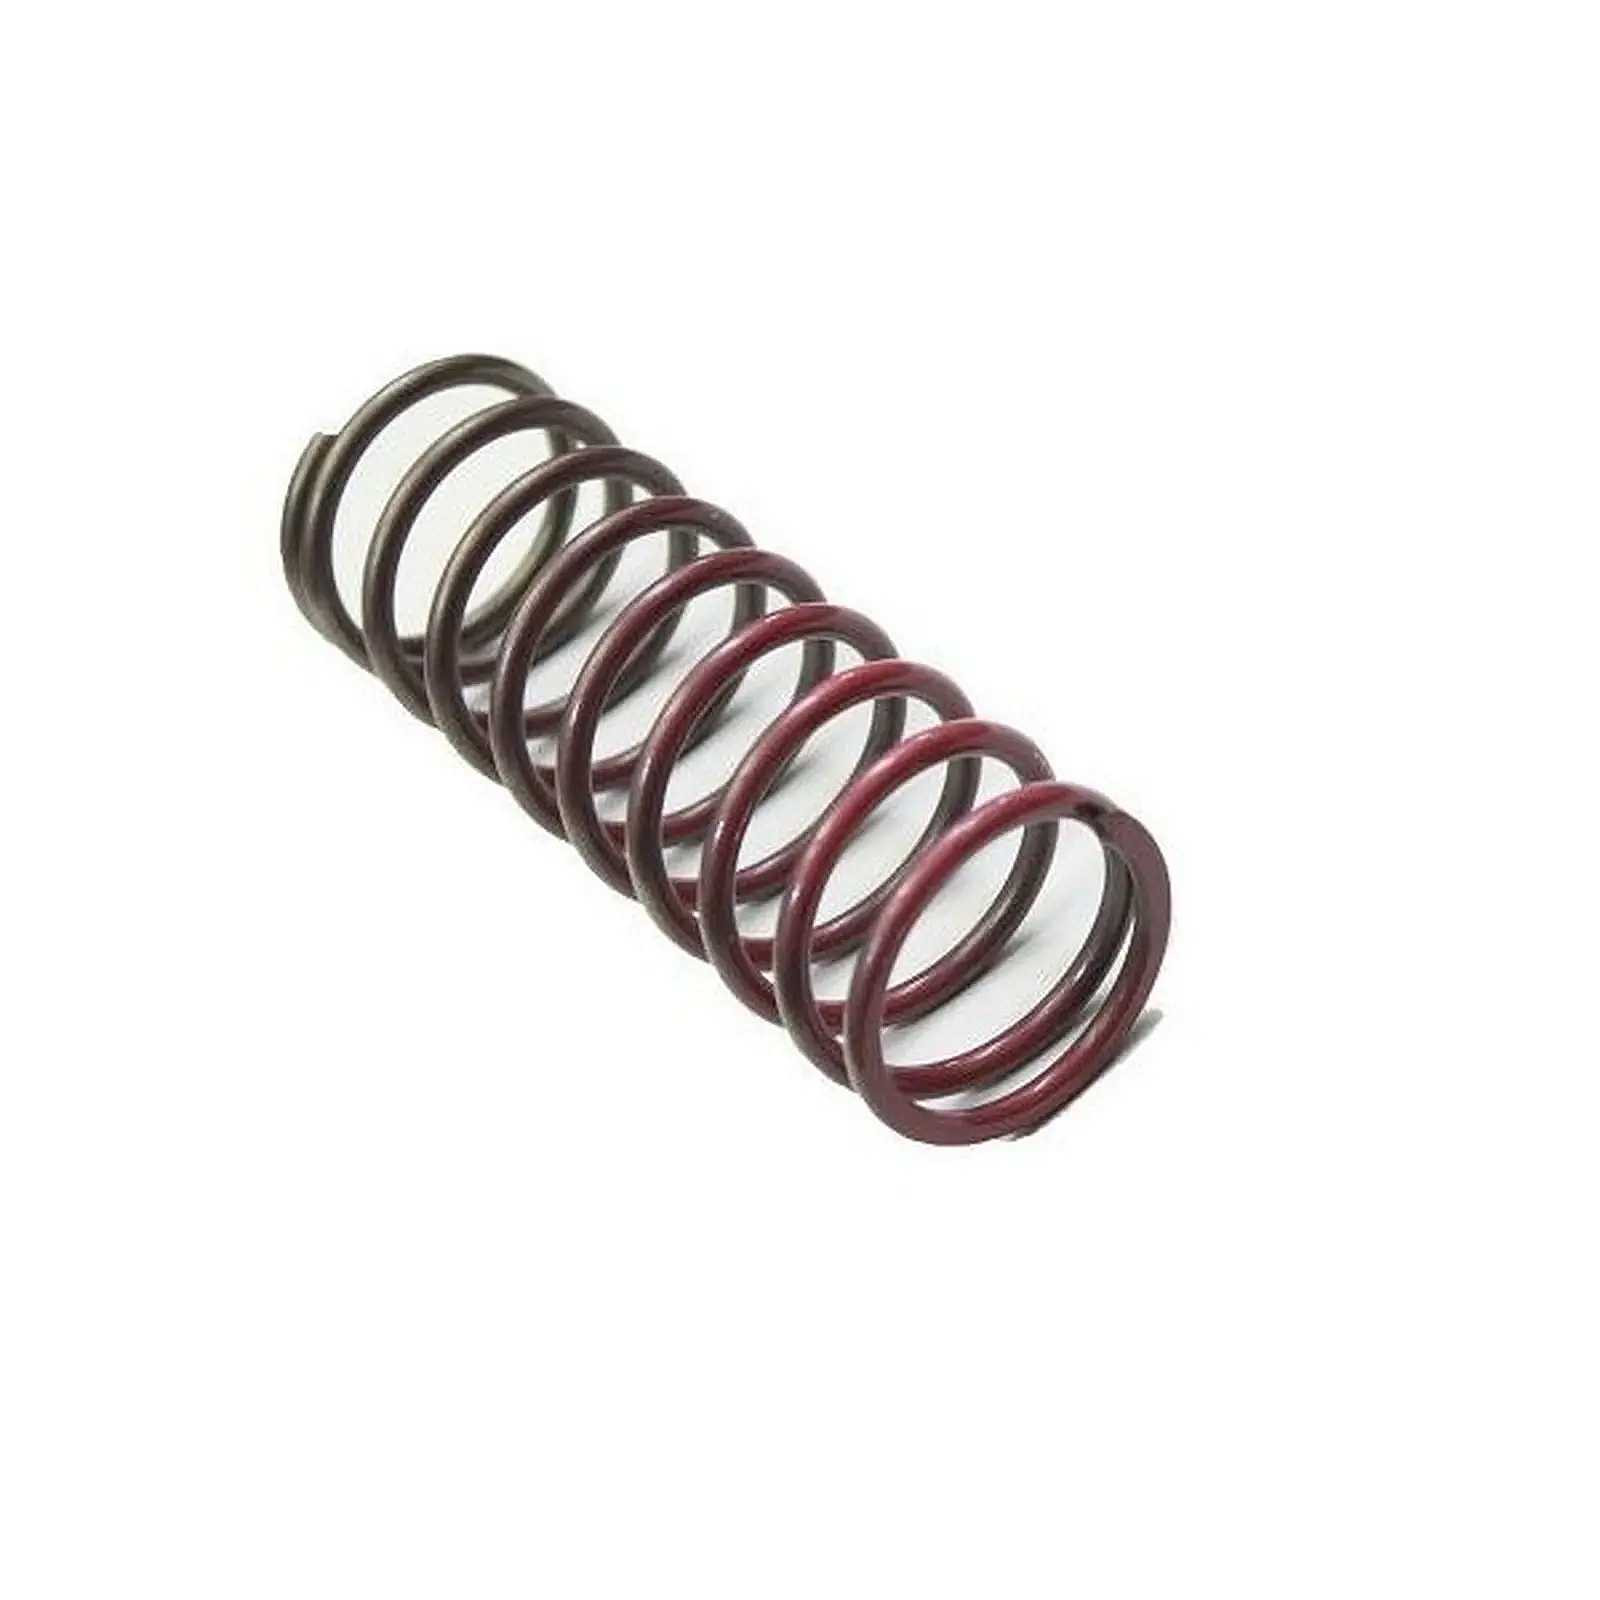 Tial blow off valve springs